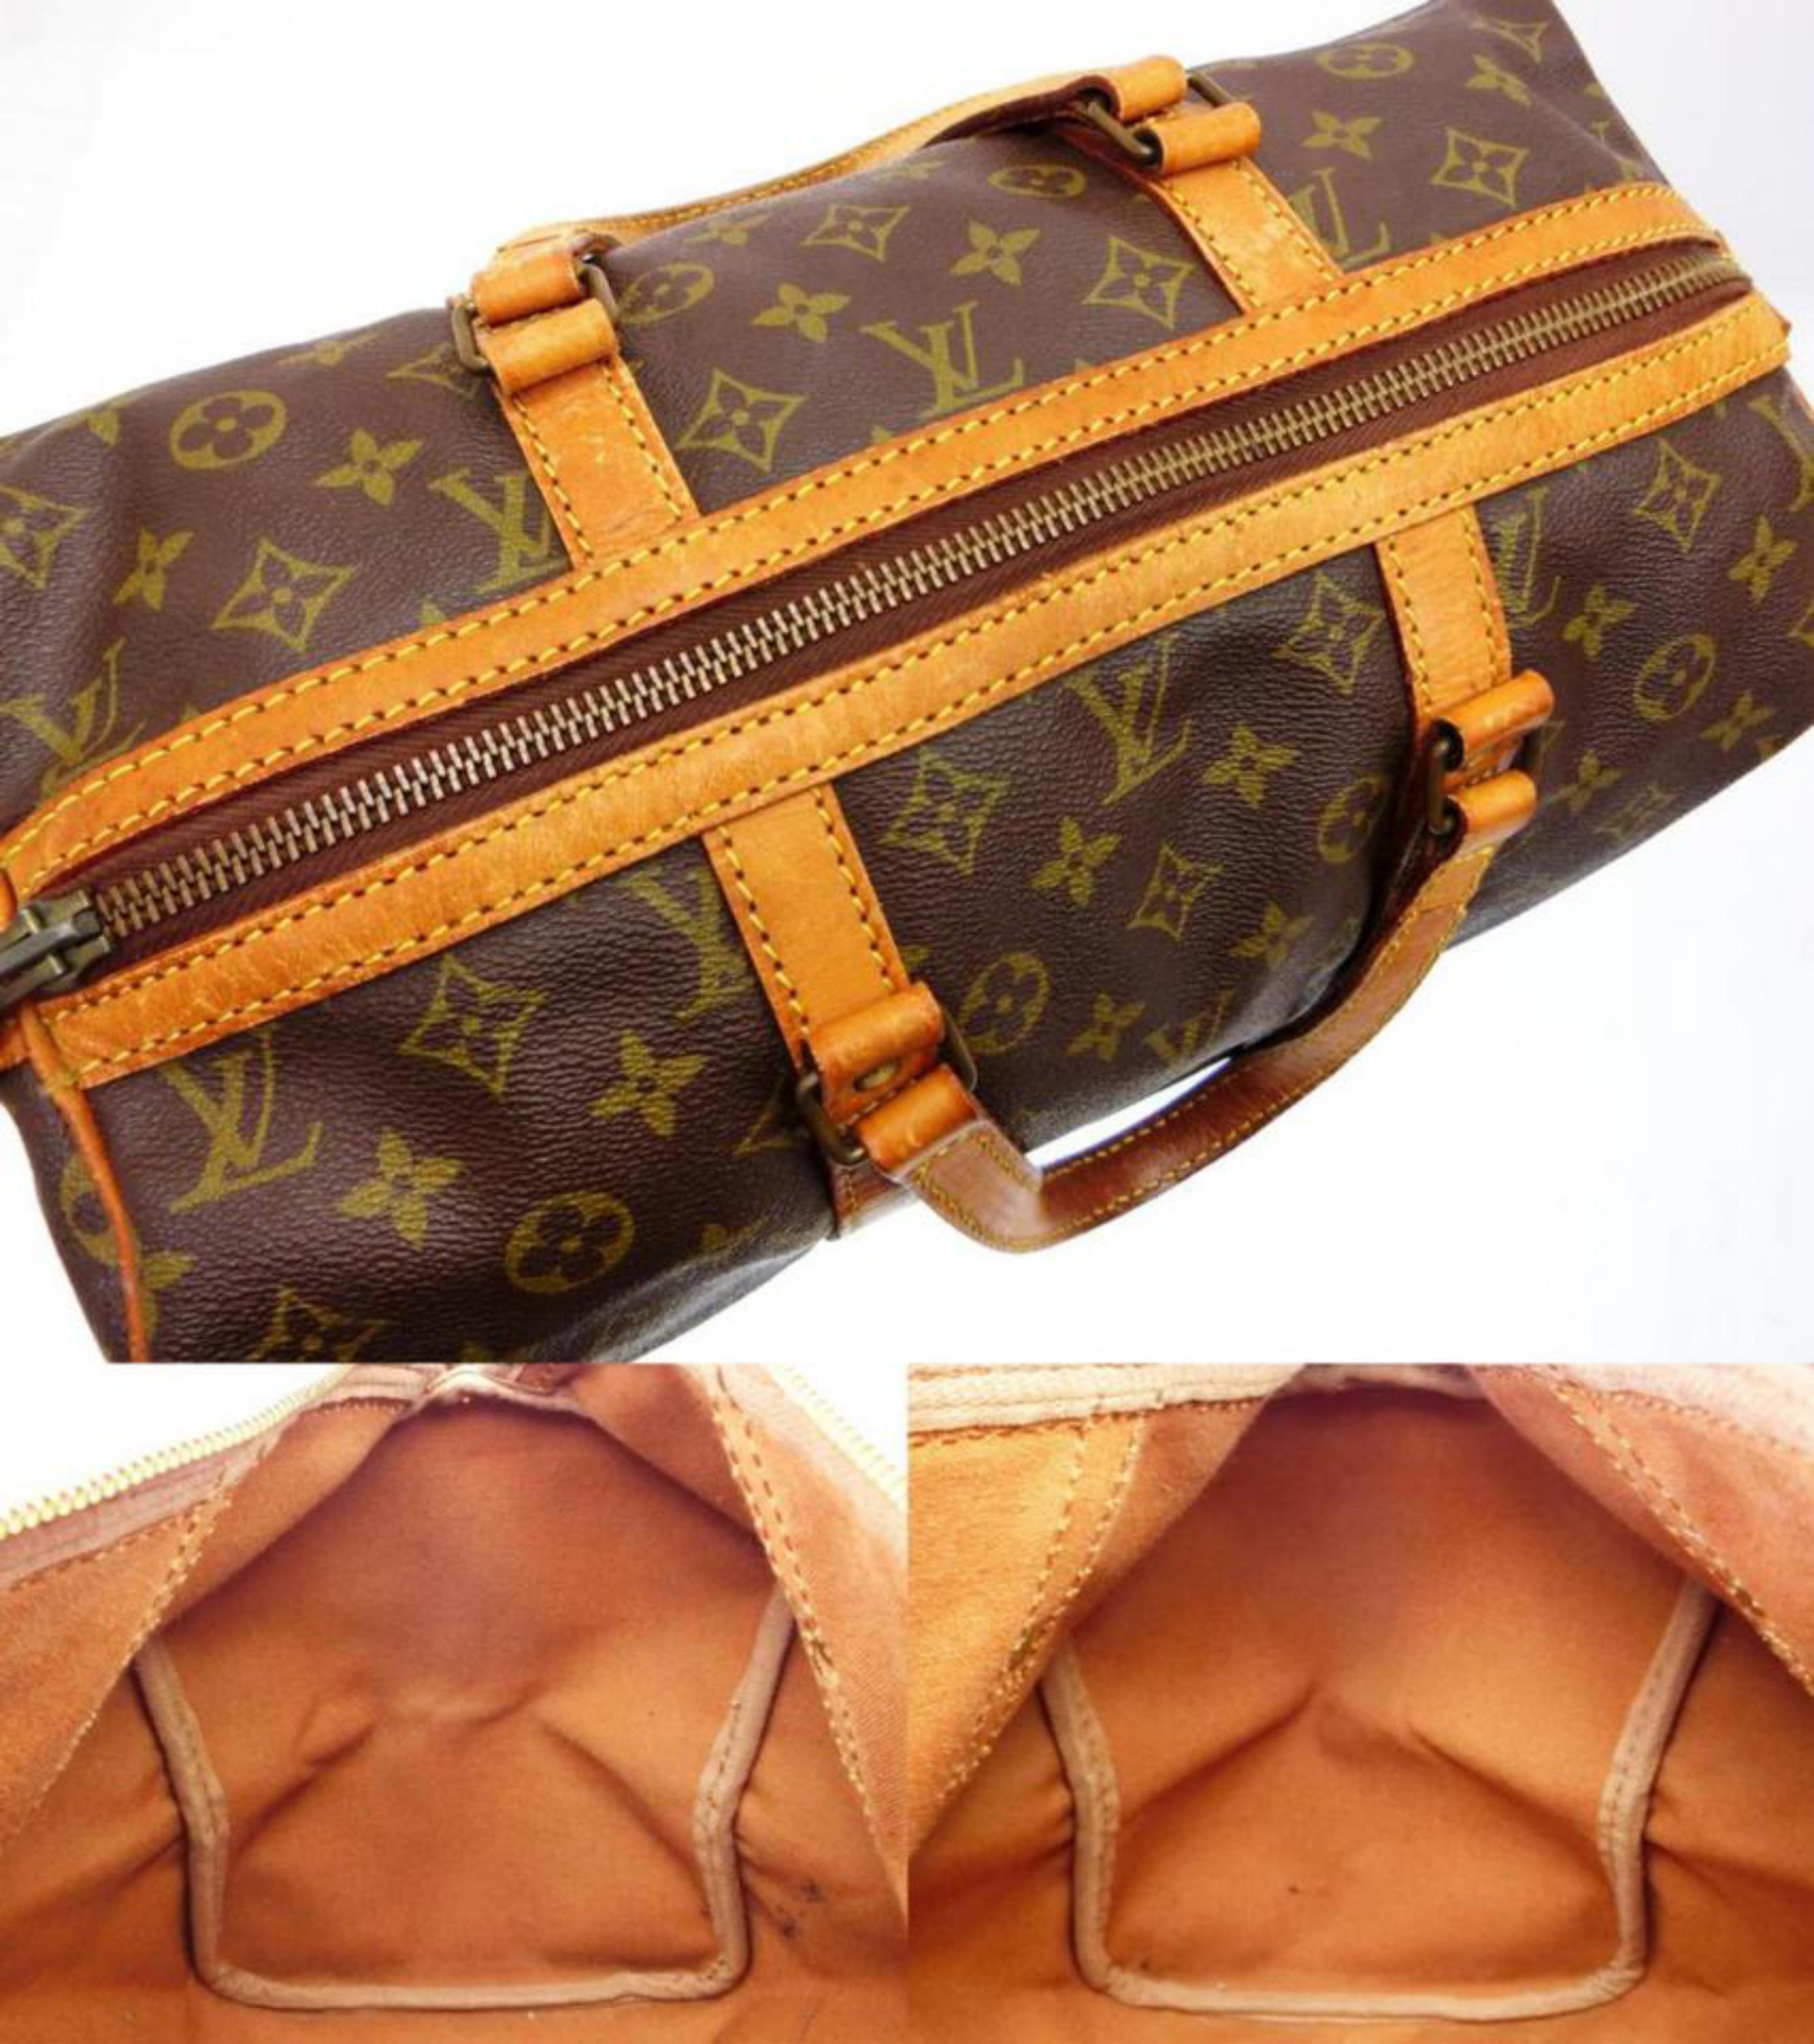 Louis Vuitton Sac Souple Monogram 45 227039 Coated Canvas Weekend/Travel Bag In Good Condition For Sale In Forest Hills, NY